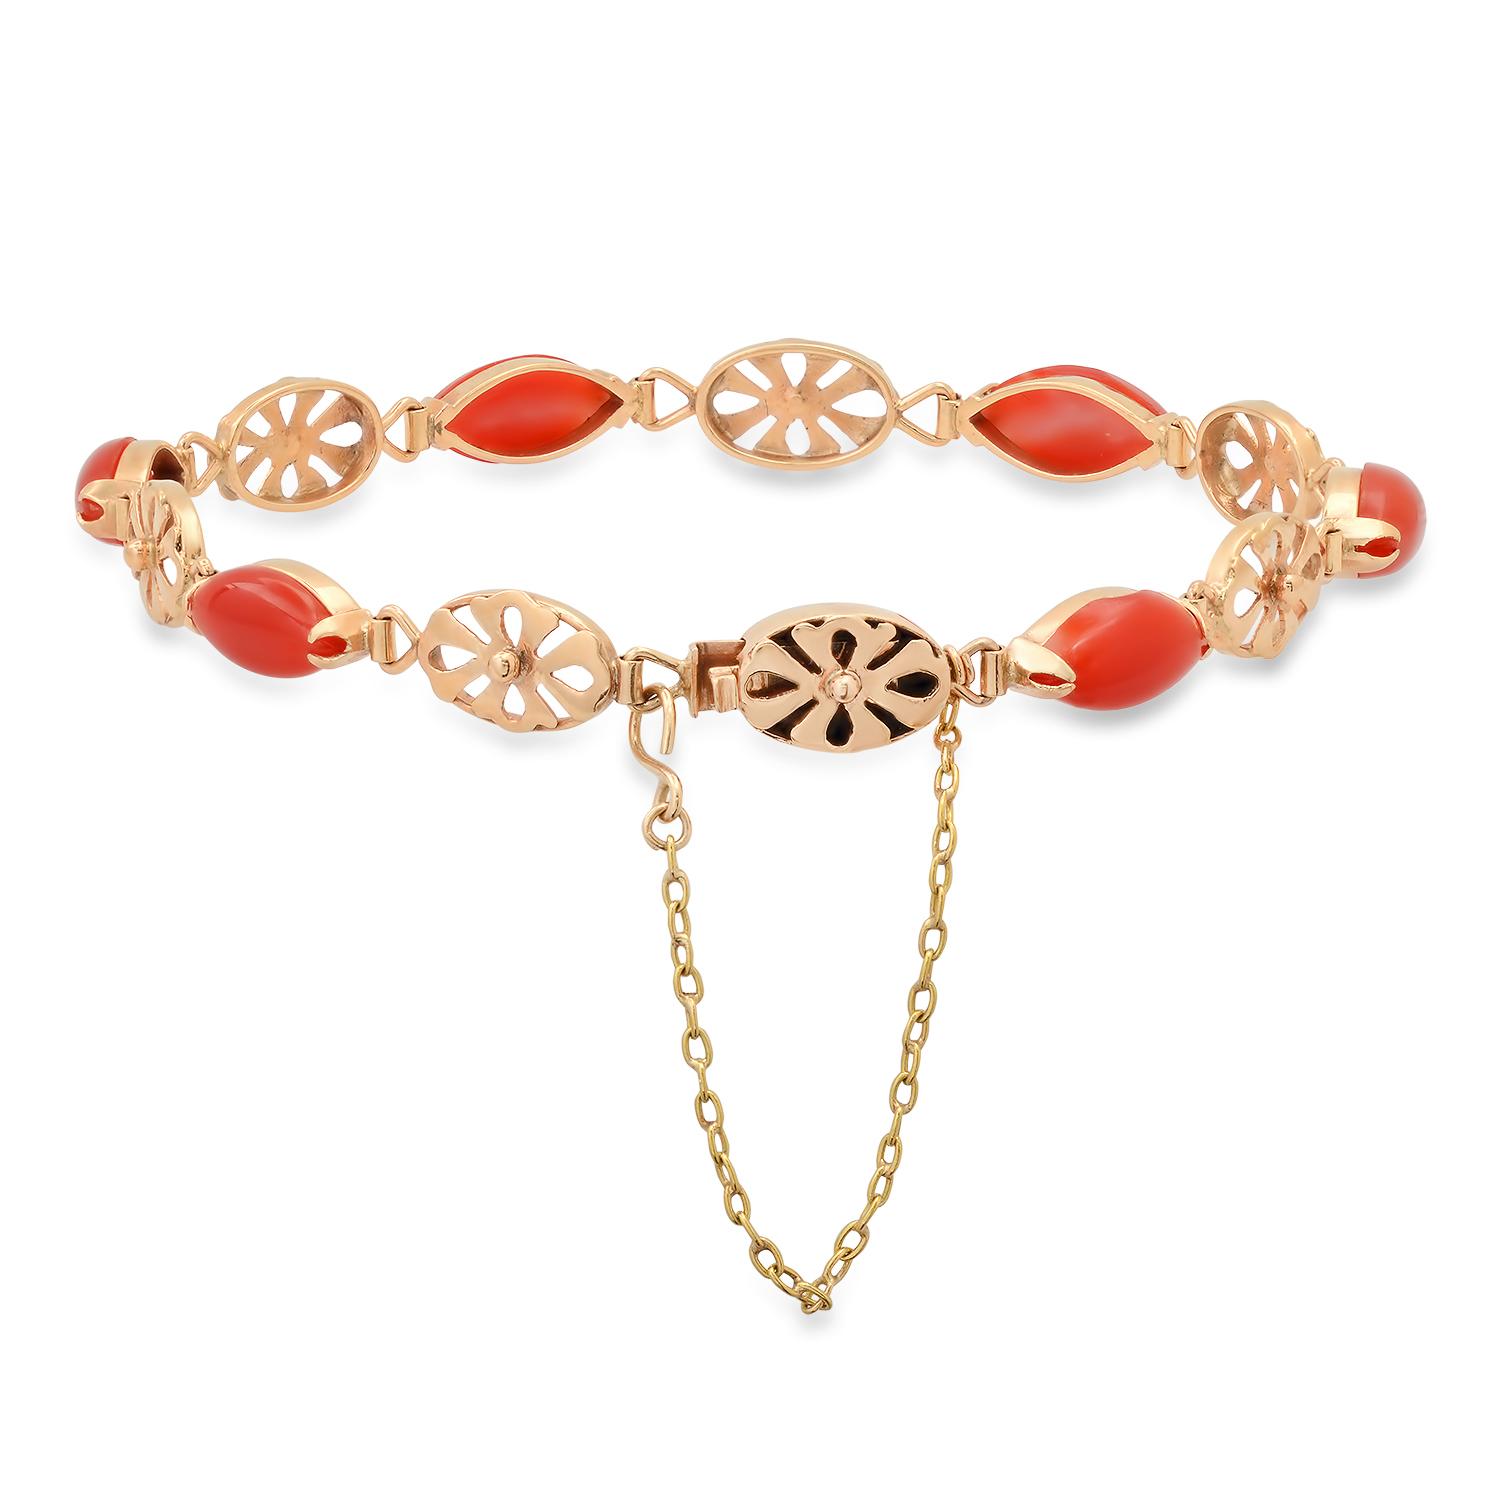 14K Yellow Gold Setting with 10.92ct Coral Ladies Bracelet